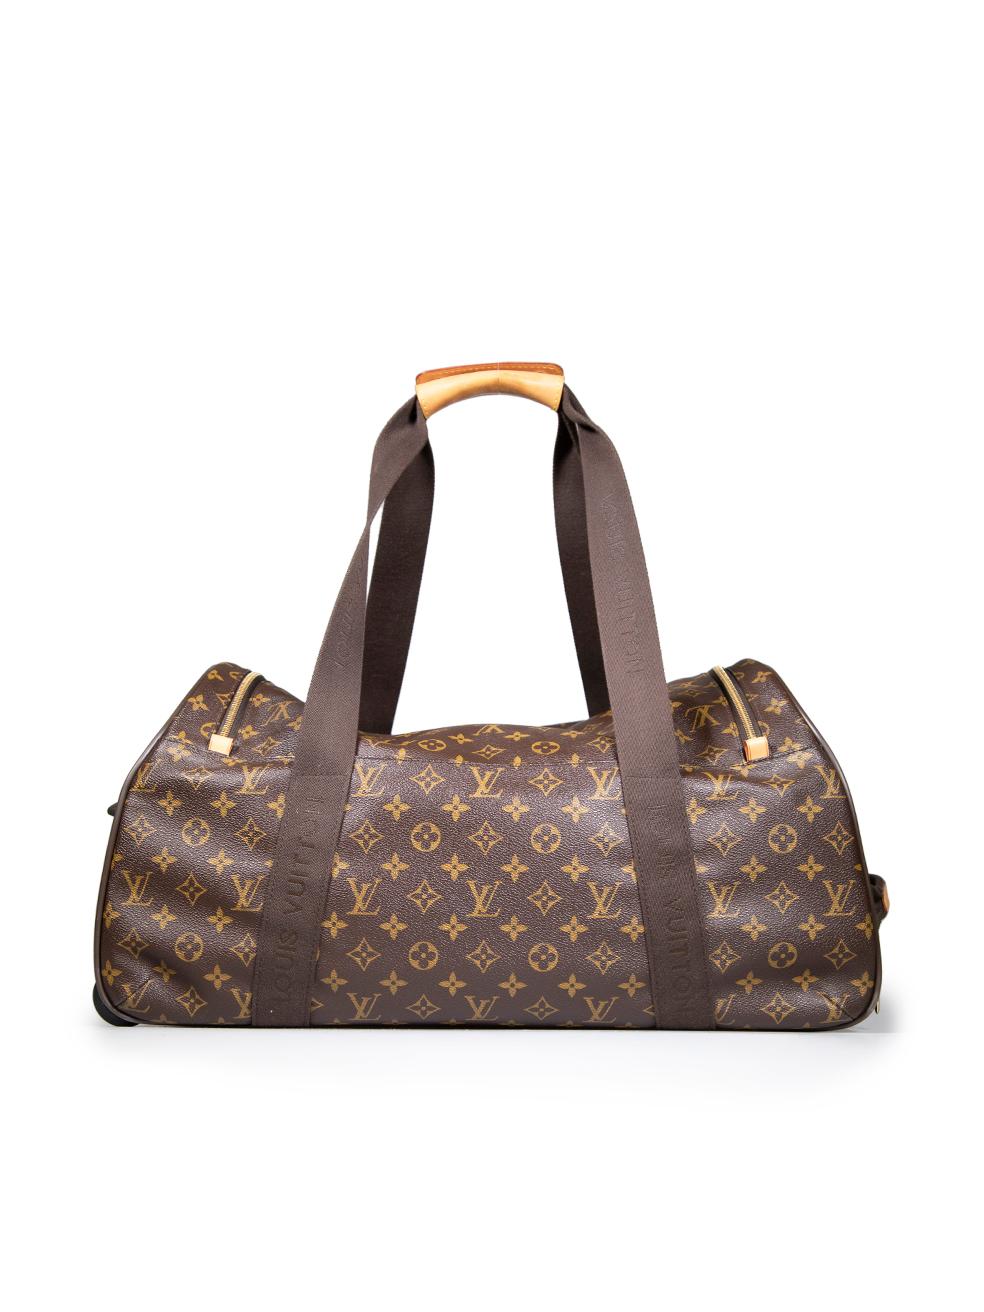 Louis Vuitton 2015 Brown Monogram Duffle Suitcase Neo Eole 65 In Good Condition For Sale In London, GB